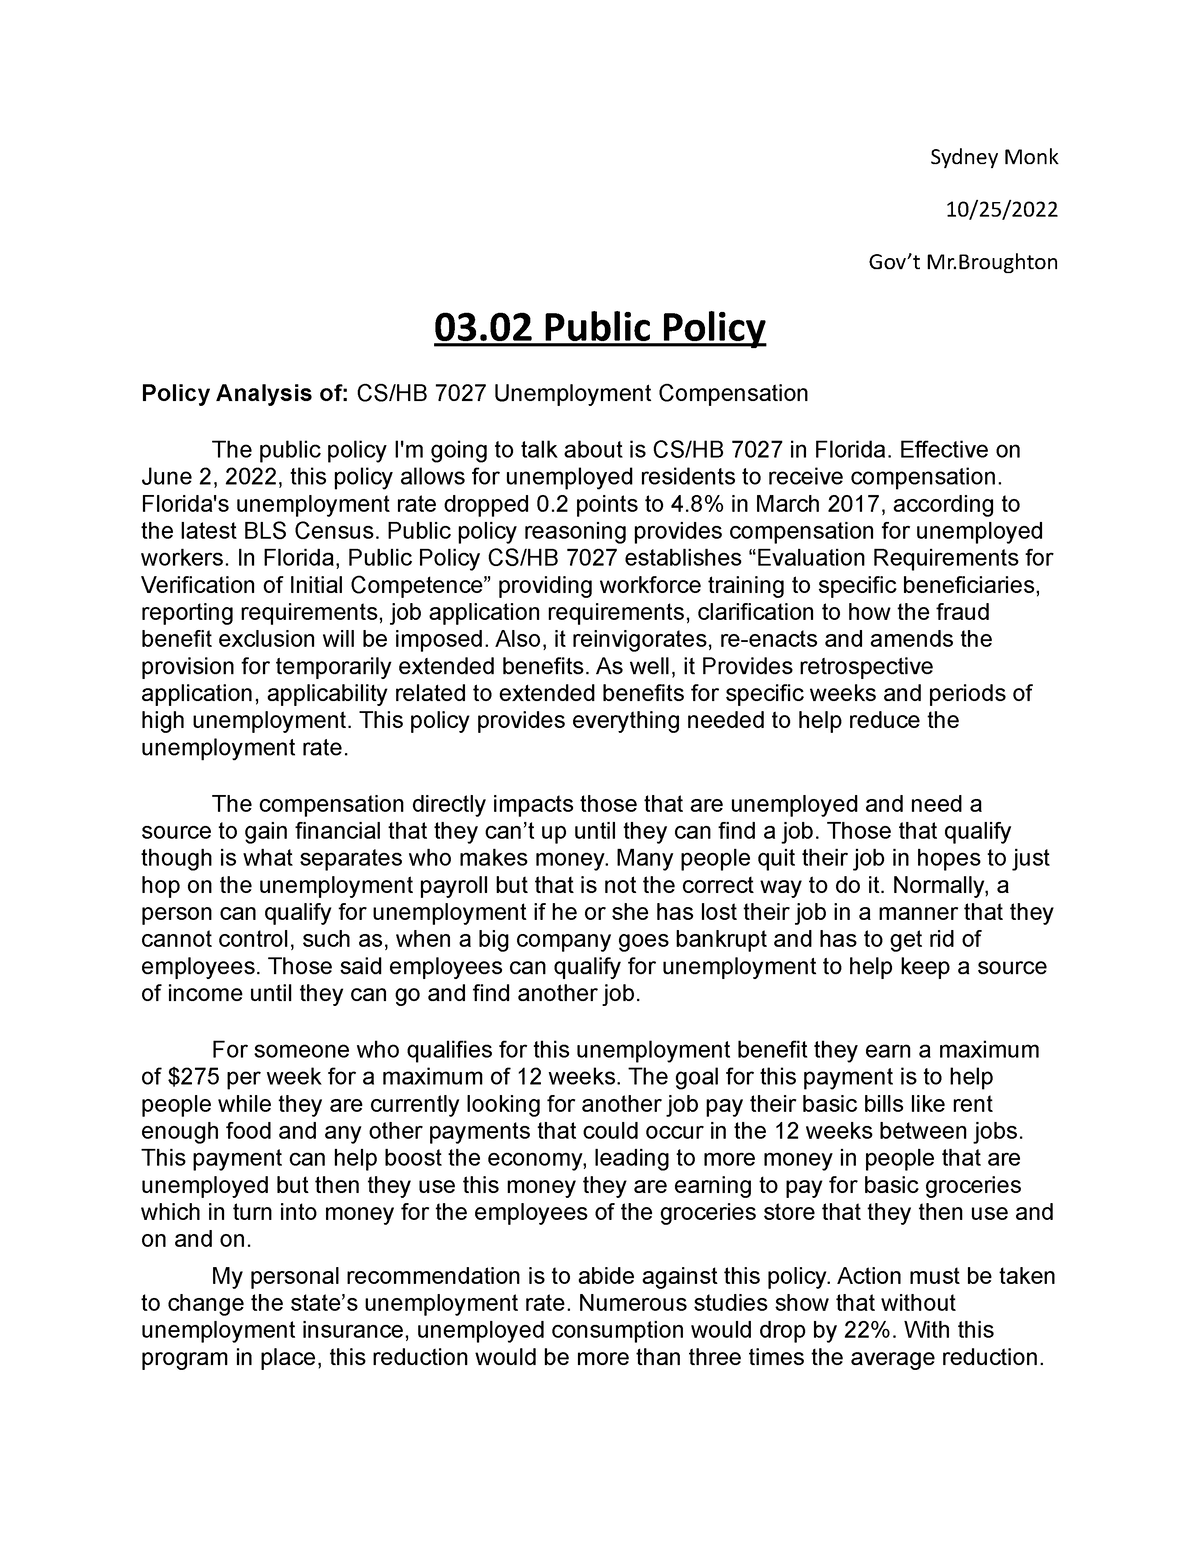 assignment 03.02 public policy